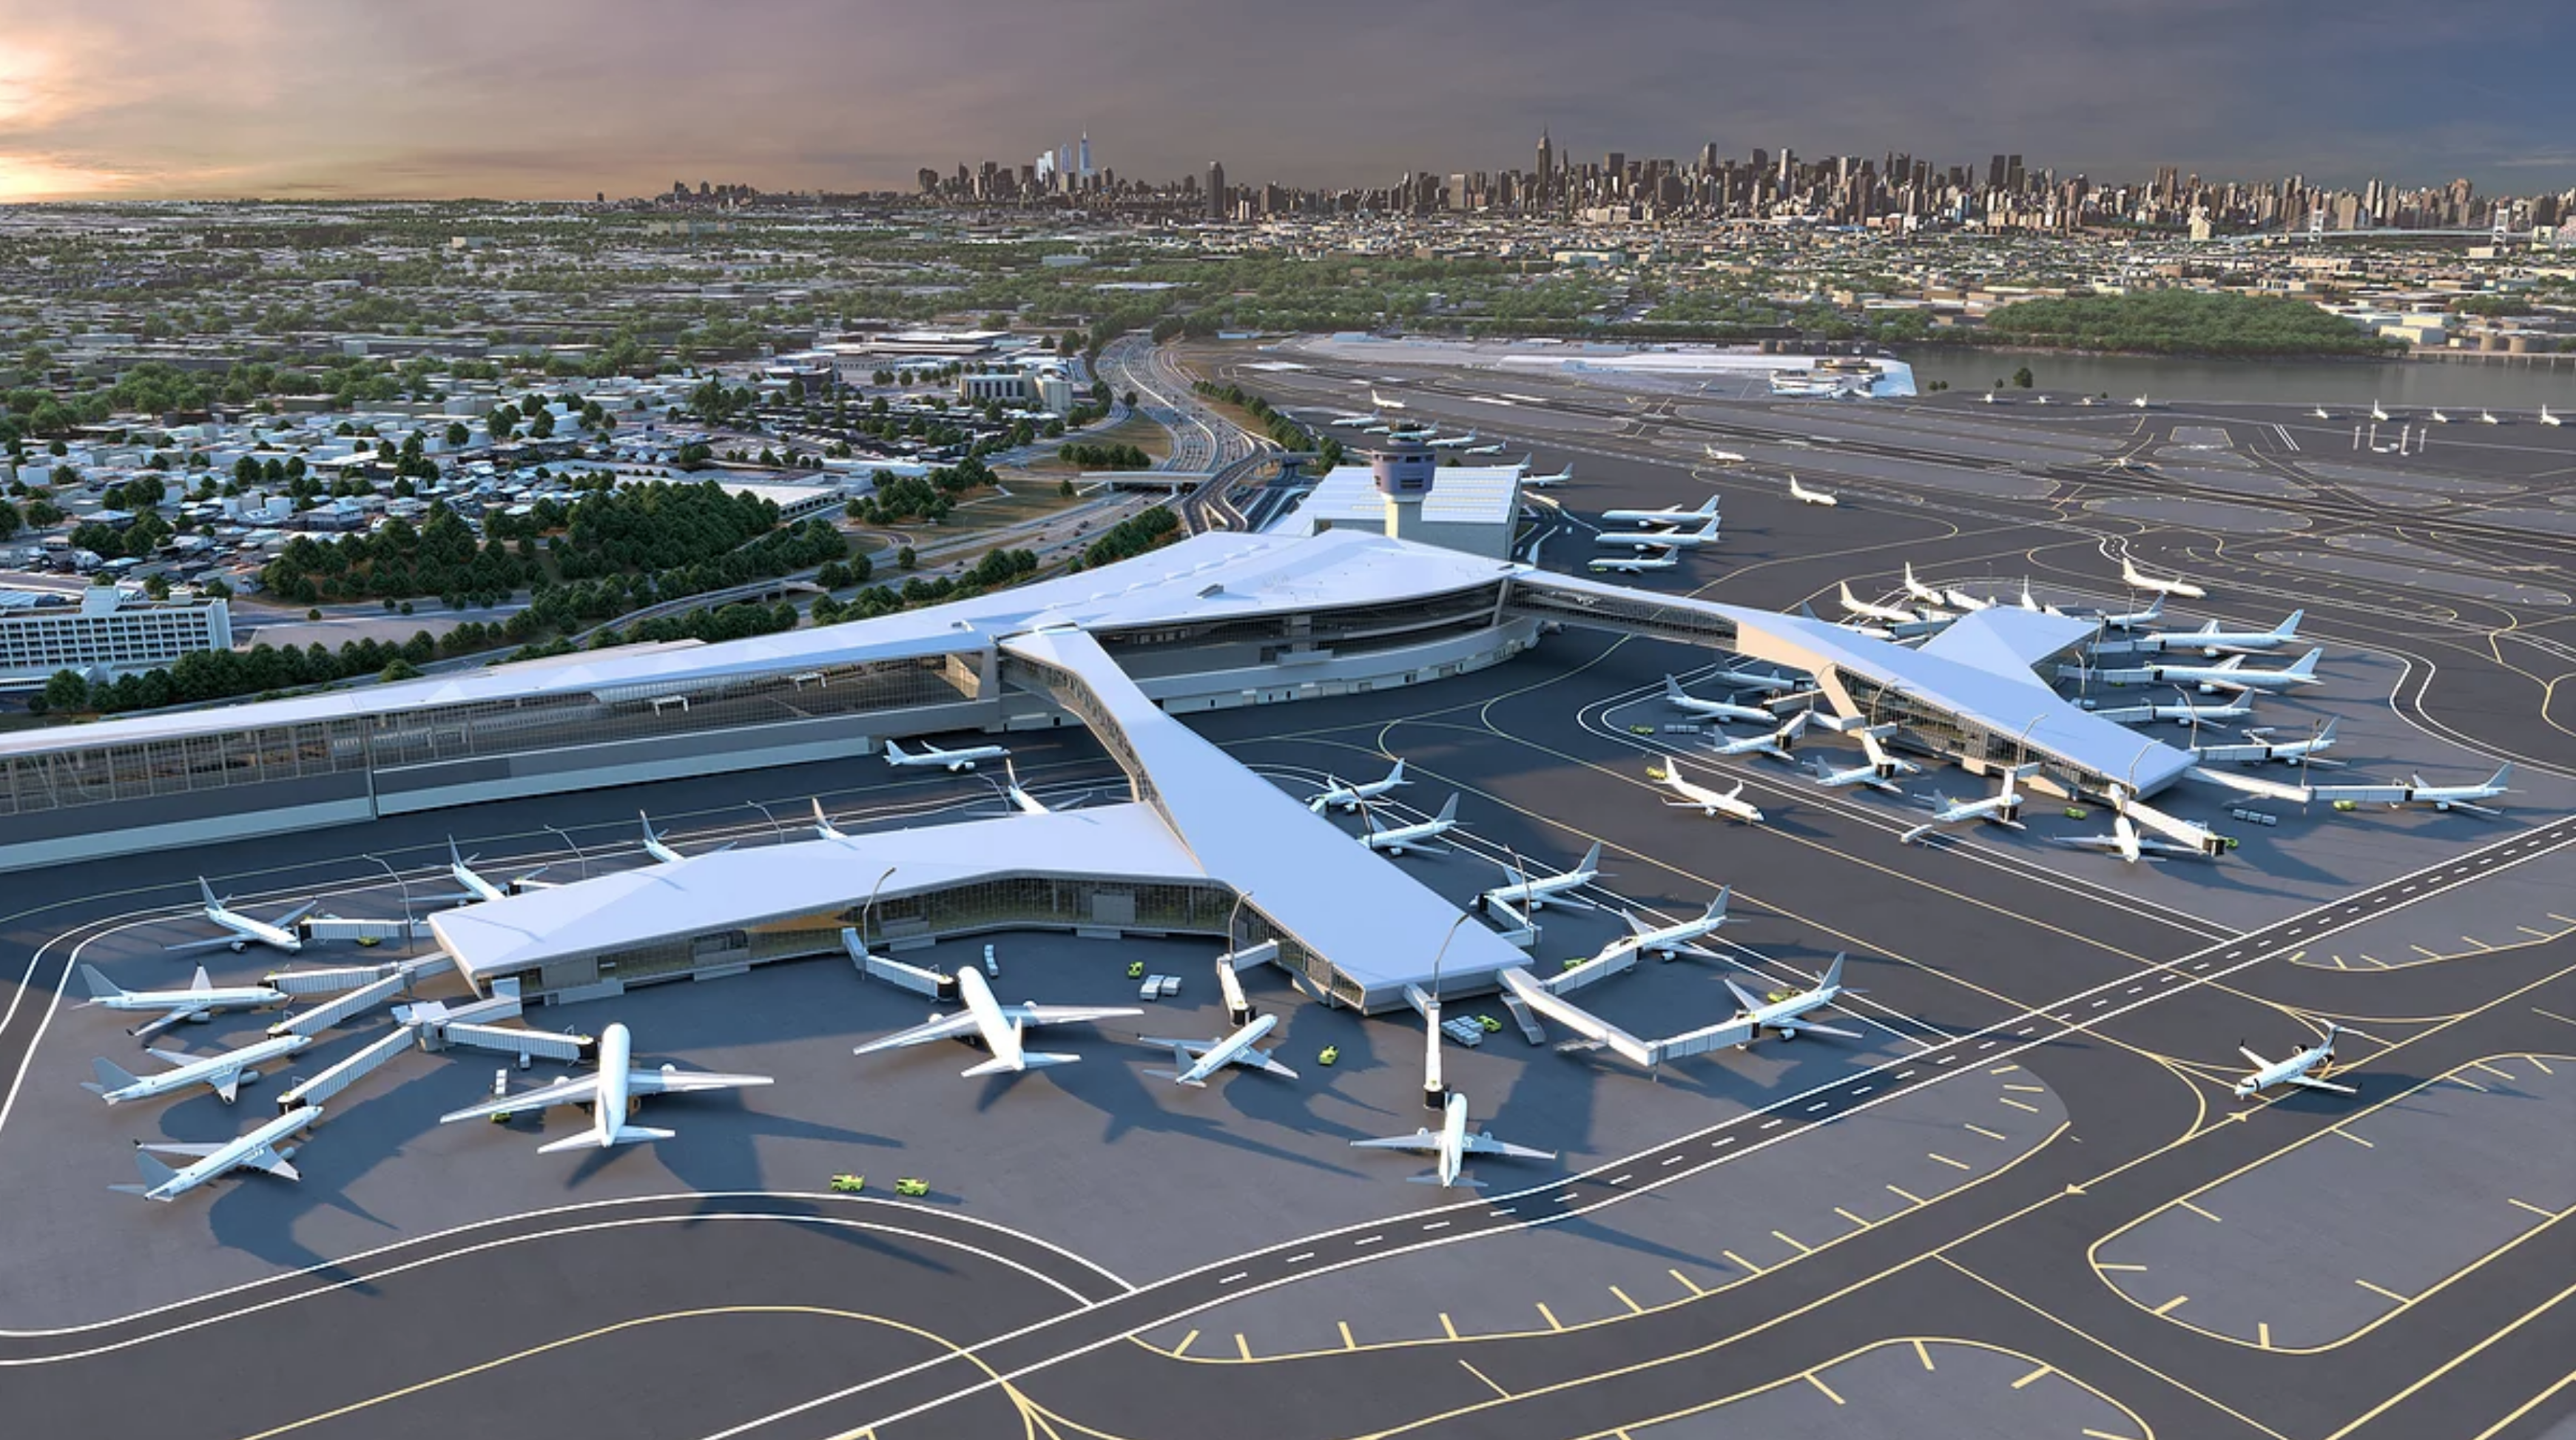 Rendering of the newly expended LaGuardia Airport